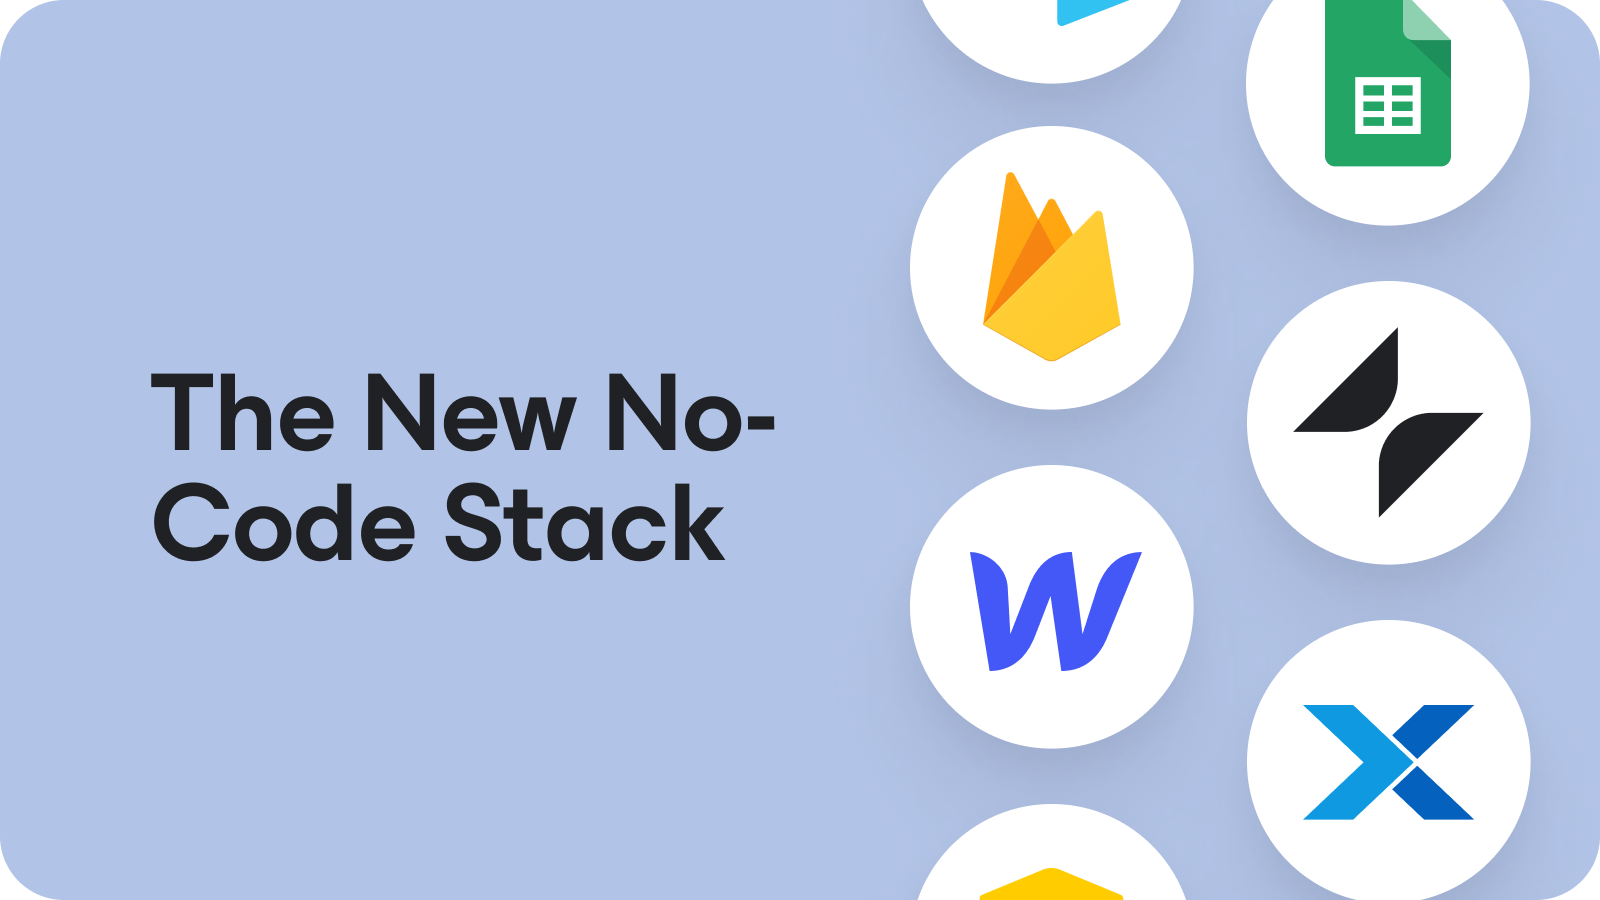 7 Essential Tools for Your No-Code Stack